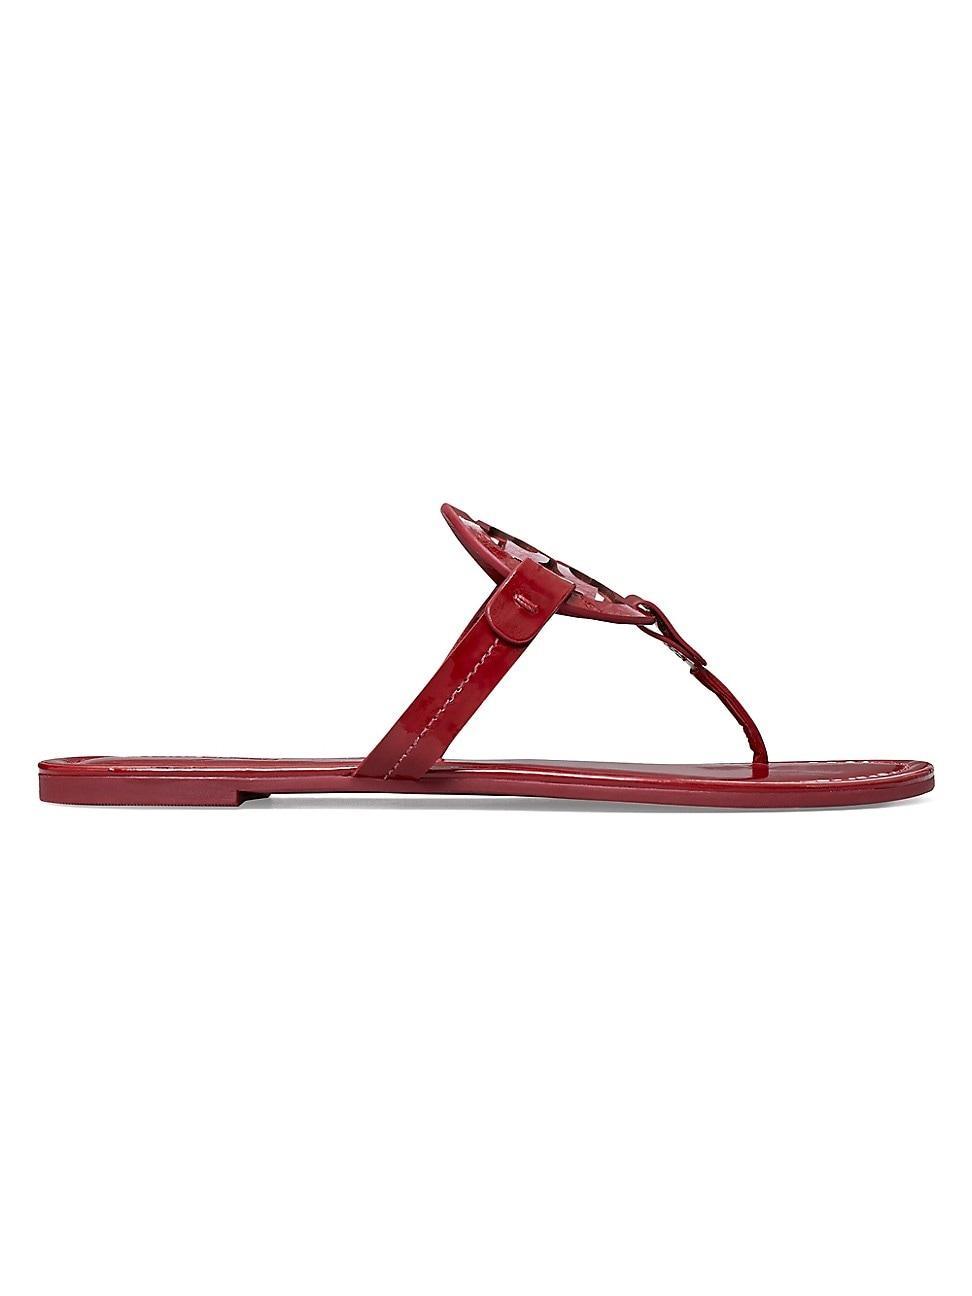 Womens Miller Patent Leather Sandals Product Image